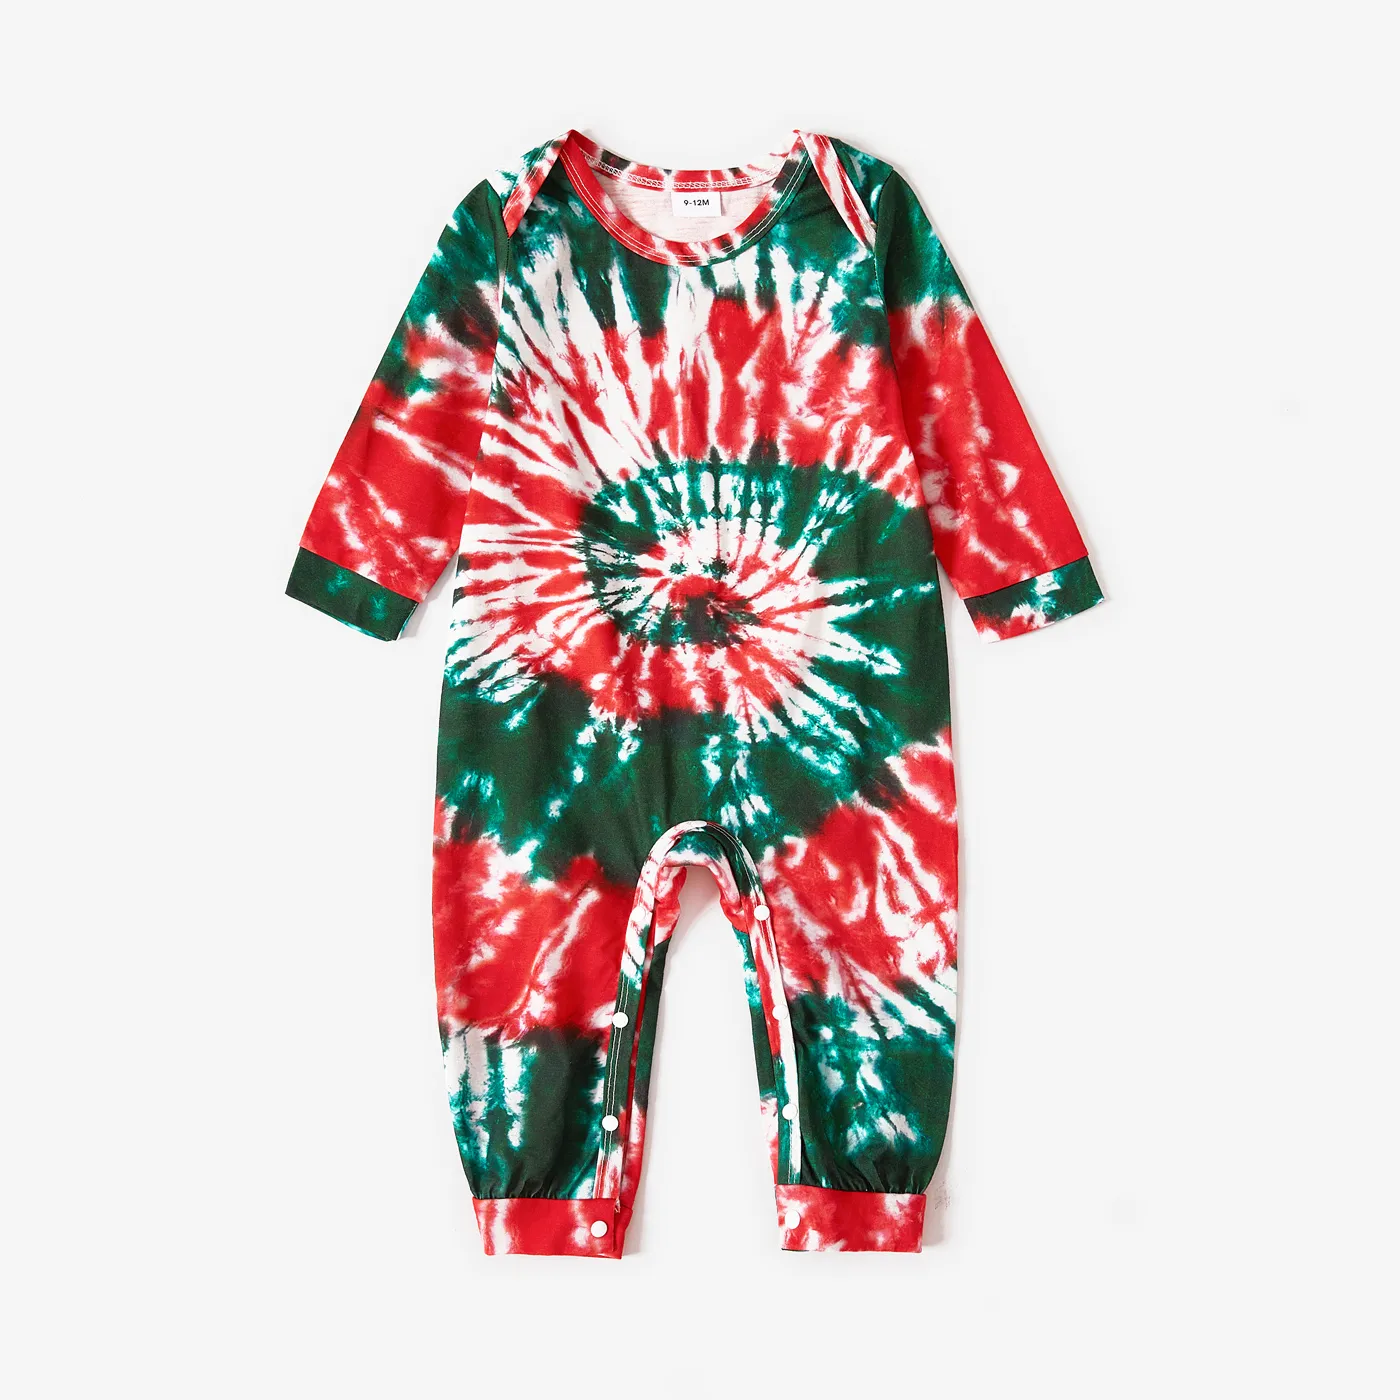 Christmas Family Matching Allover Tie Dye Long-sleeve Pajamas Sets (Flame Resistant)